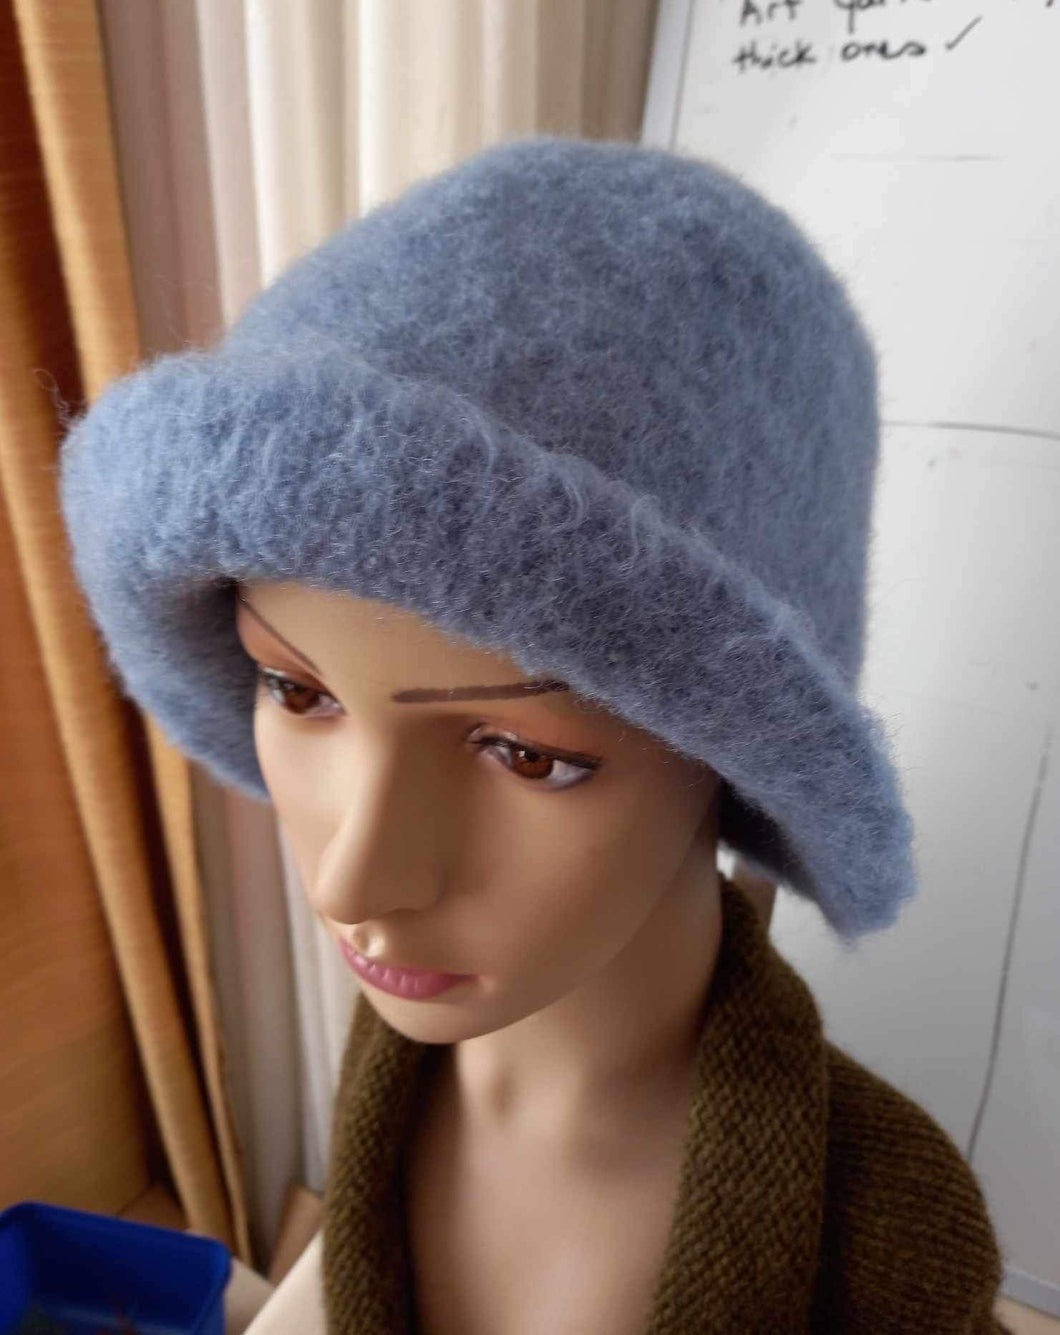 100% Wool Felted Hat - Soft Blue